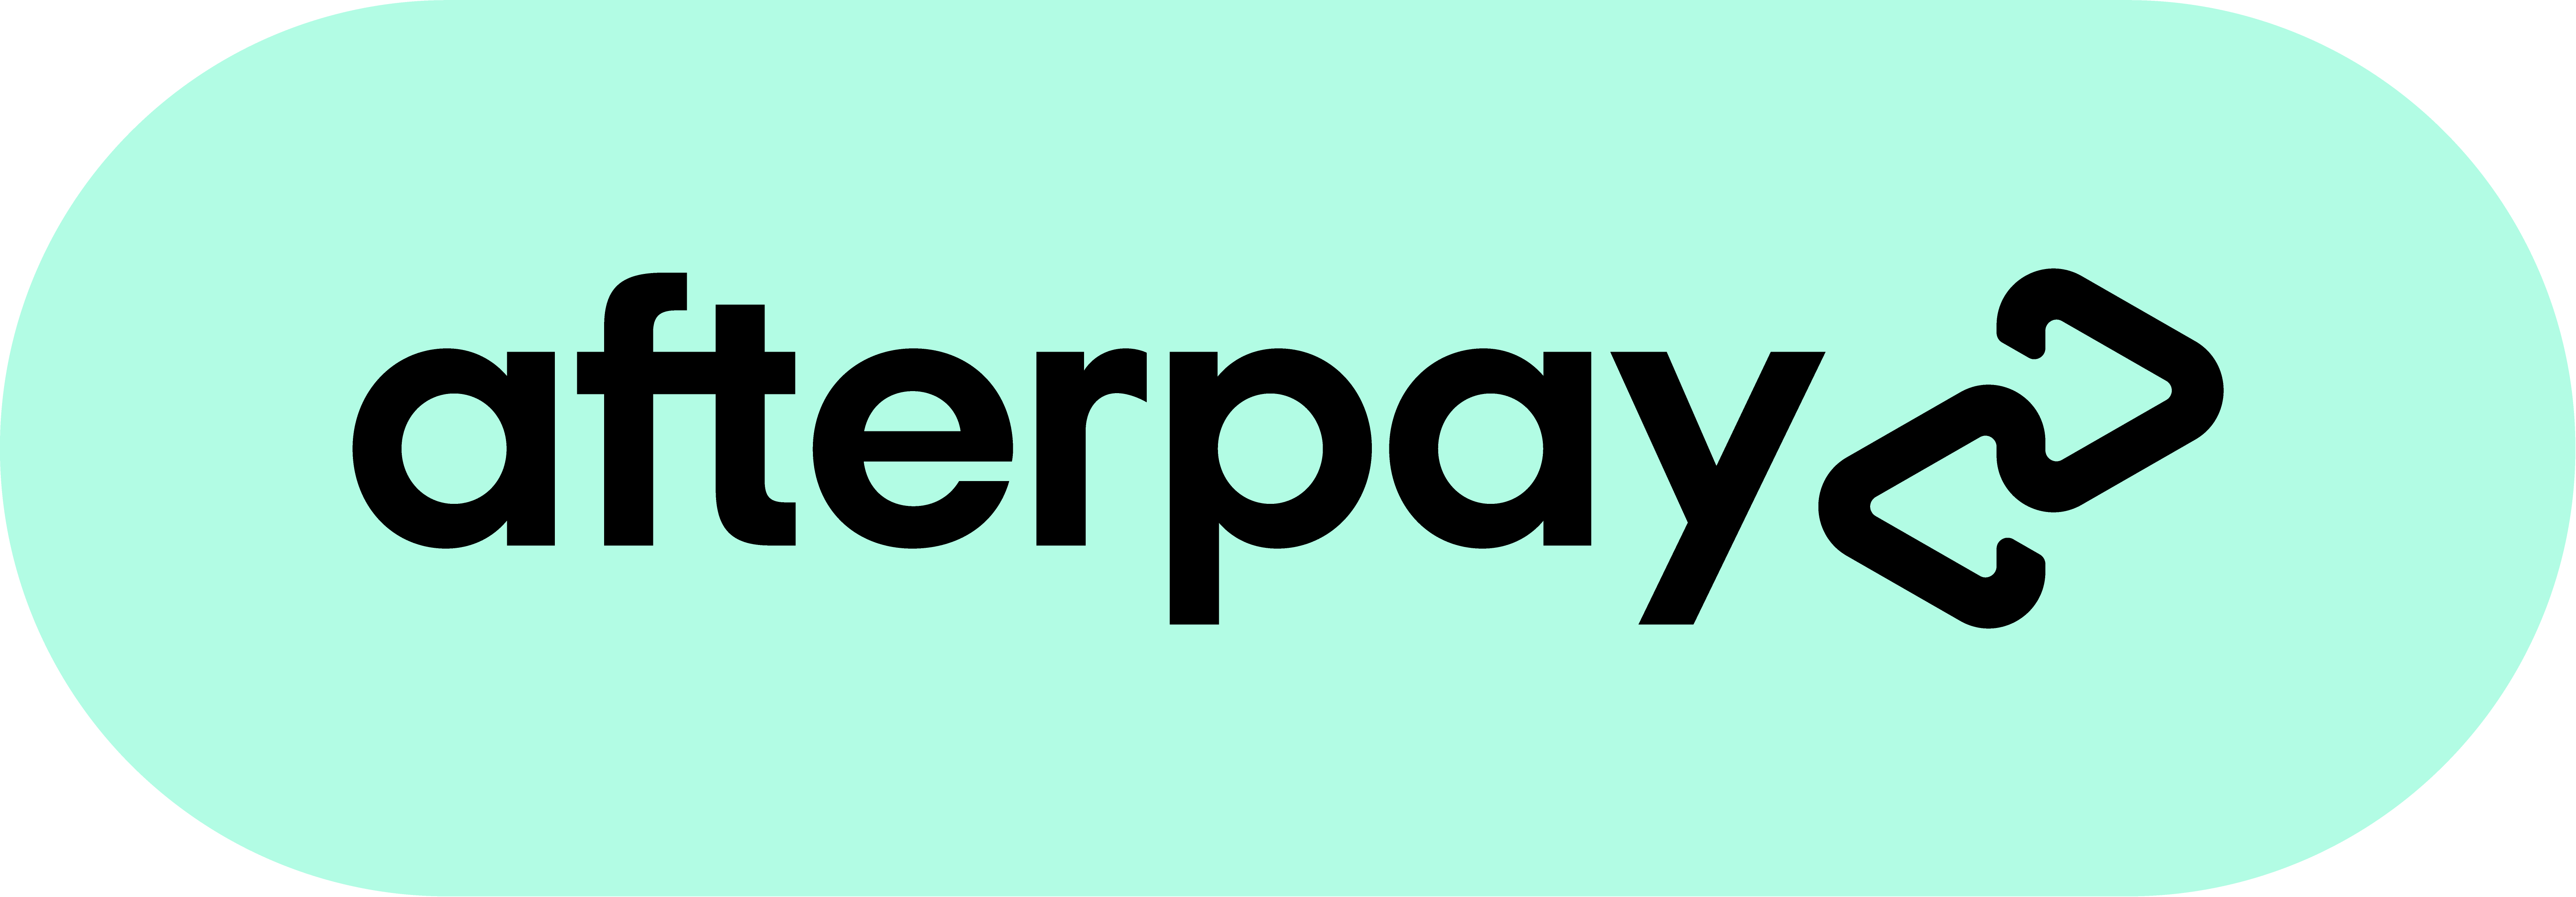 Marketing resources center - Emails - Promote With Afterpay